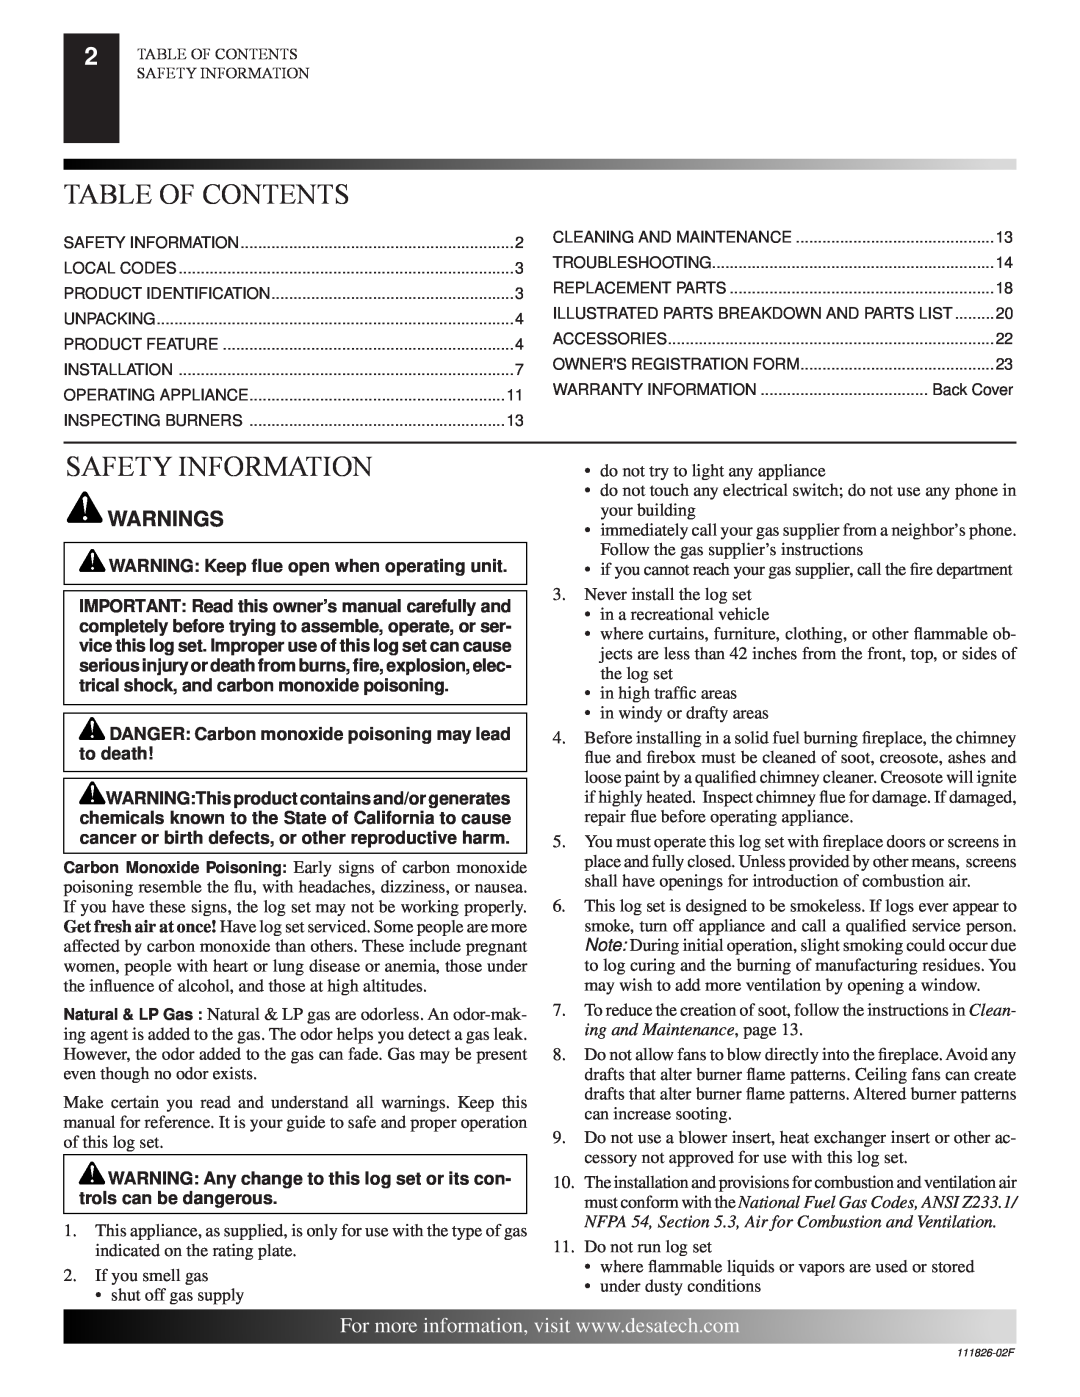 Desa VTD-18N-PDG, VTD-24P-PDG, VTD-24P-BTB, VTD-18N-BTB, VTD-18P-BTB Table Of Contents, Safety Information, Warnings 